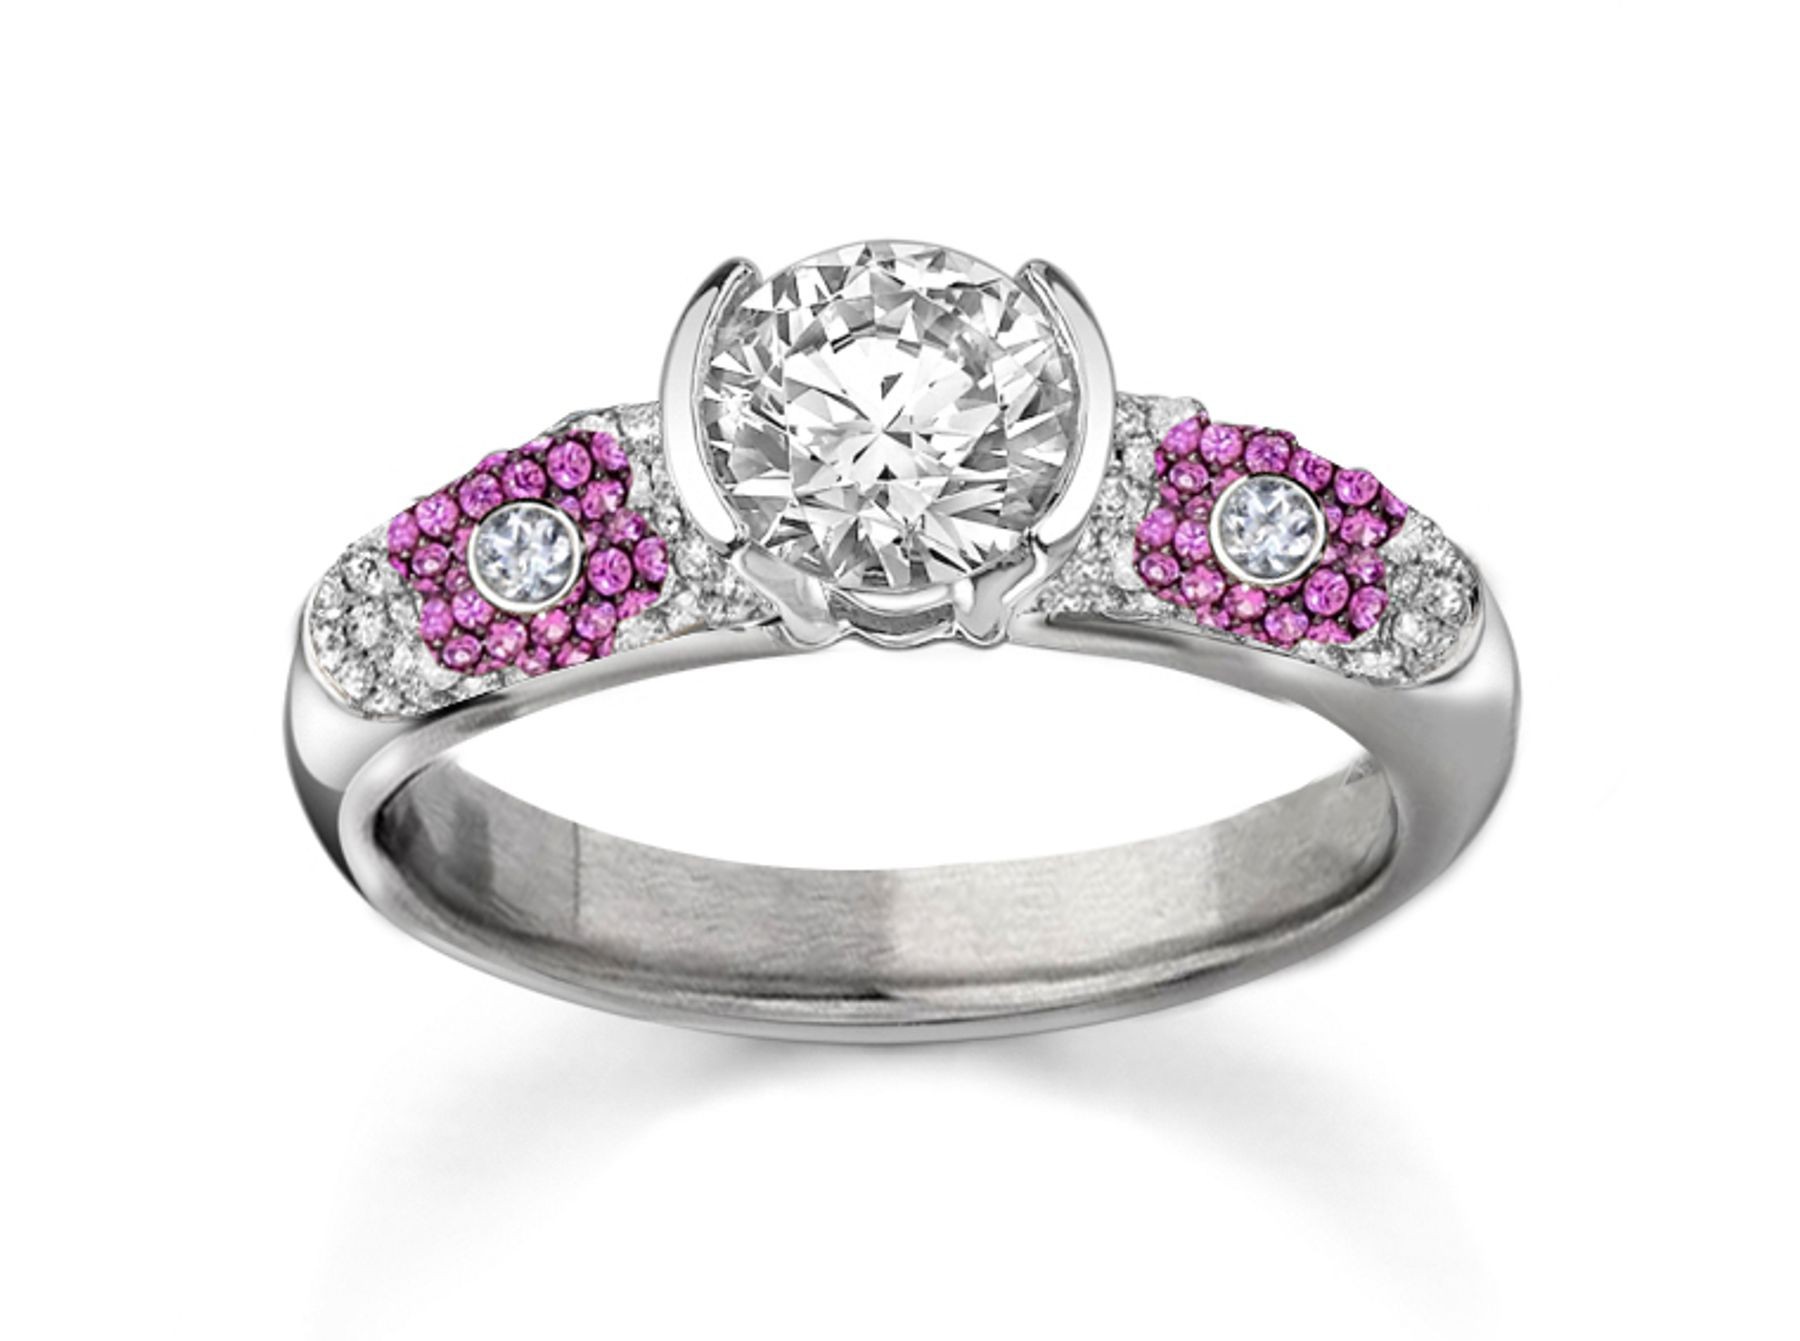 Luxurious and Large White Diamond Ring featuring pave set White Diamonds with pink Tradional Sapphire flowers